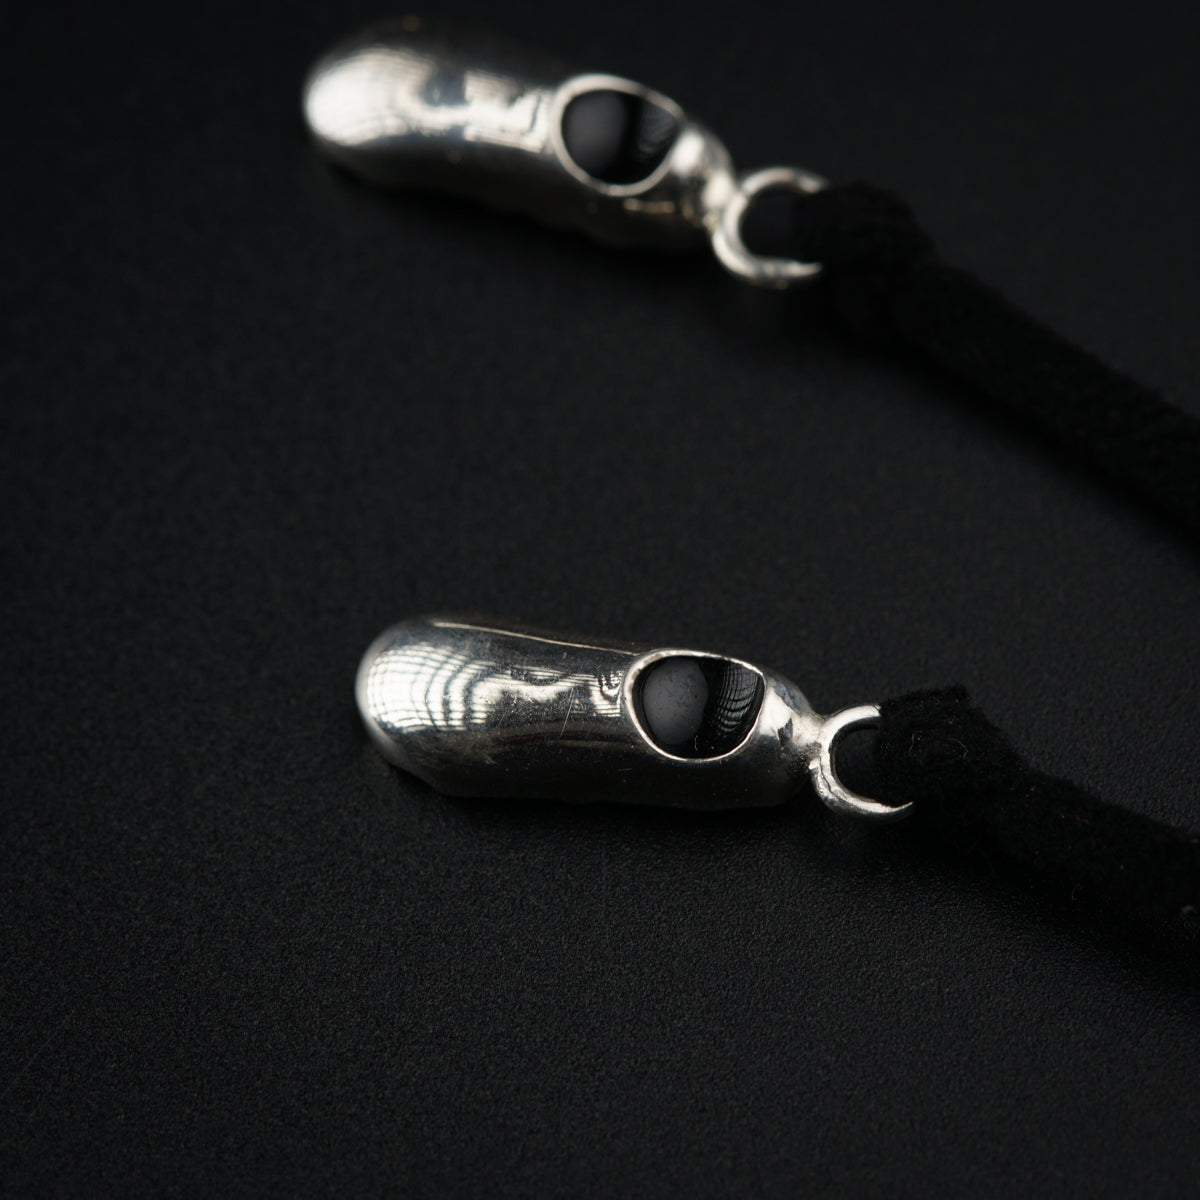 a pair of silver scissors on a black background